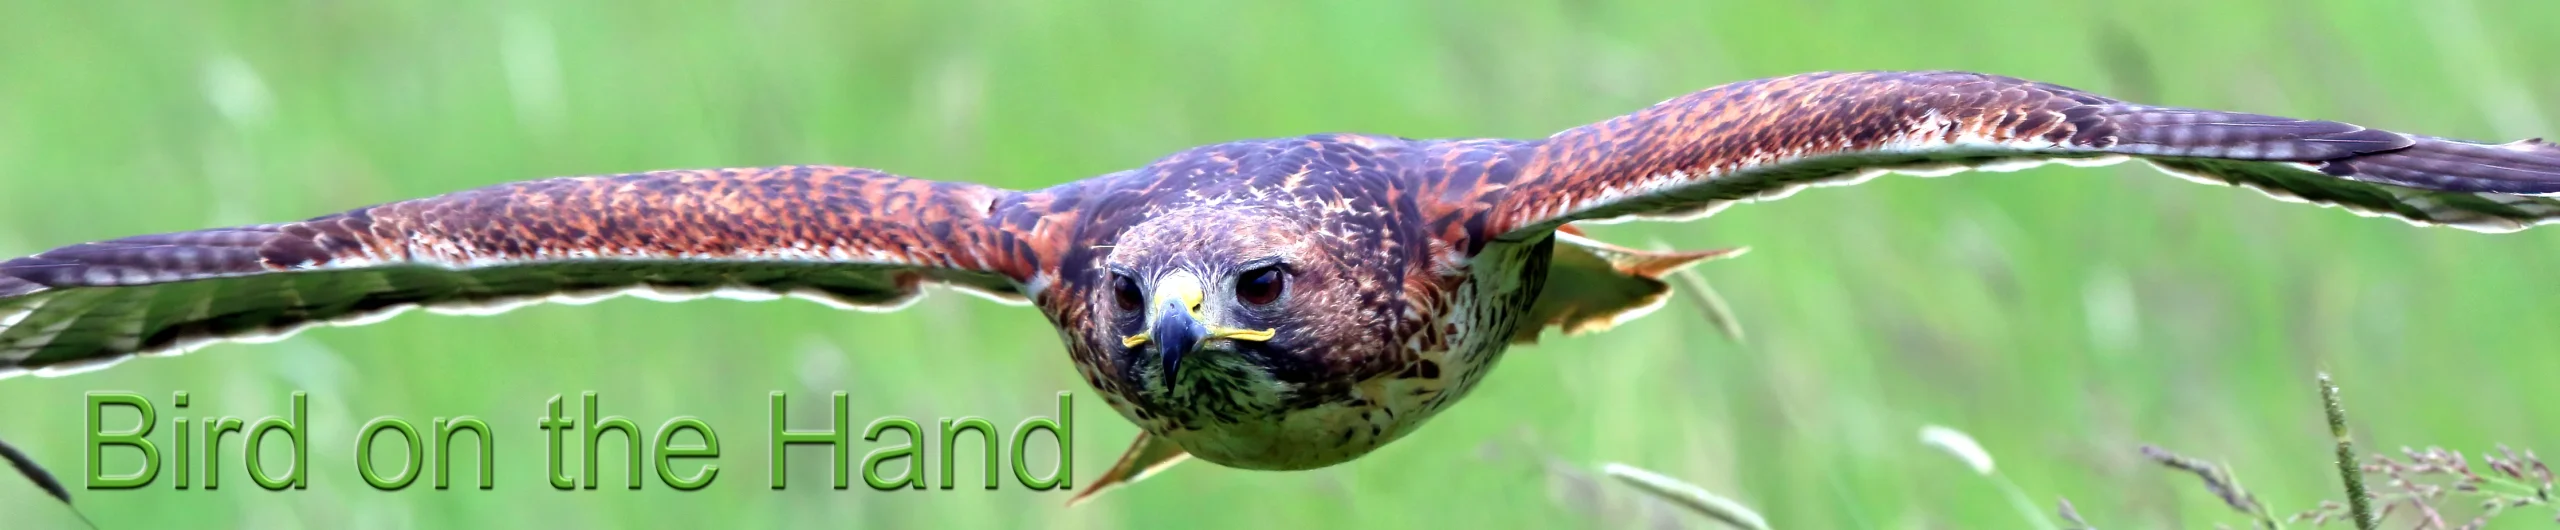 Bird on the Hand falconry experiences header. Redtail buzzard in flight